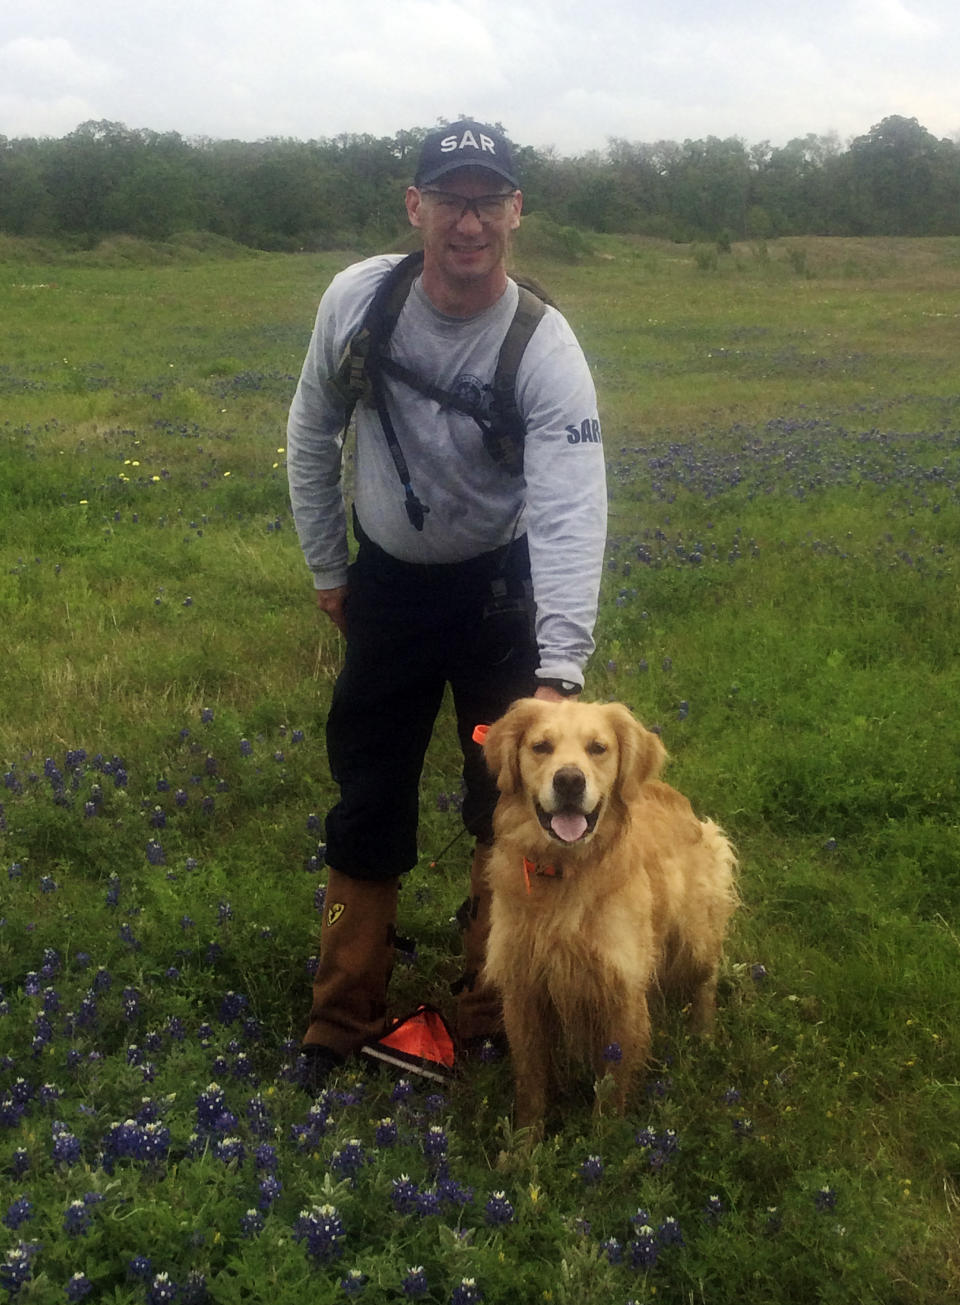 This April 2017 photo, provided by Jim Yeager, shows Robert Andrews and his golden retriever, Cooper, in College Station, Texas, as they completed a certification for search-and-rescue dogs. Cooper's brother Rainier is a show champion, a relationship that illustrates ties between show dogs and dogs that do specialized work. (Jim Yeager via AP)